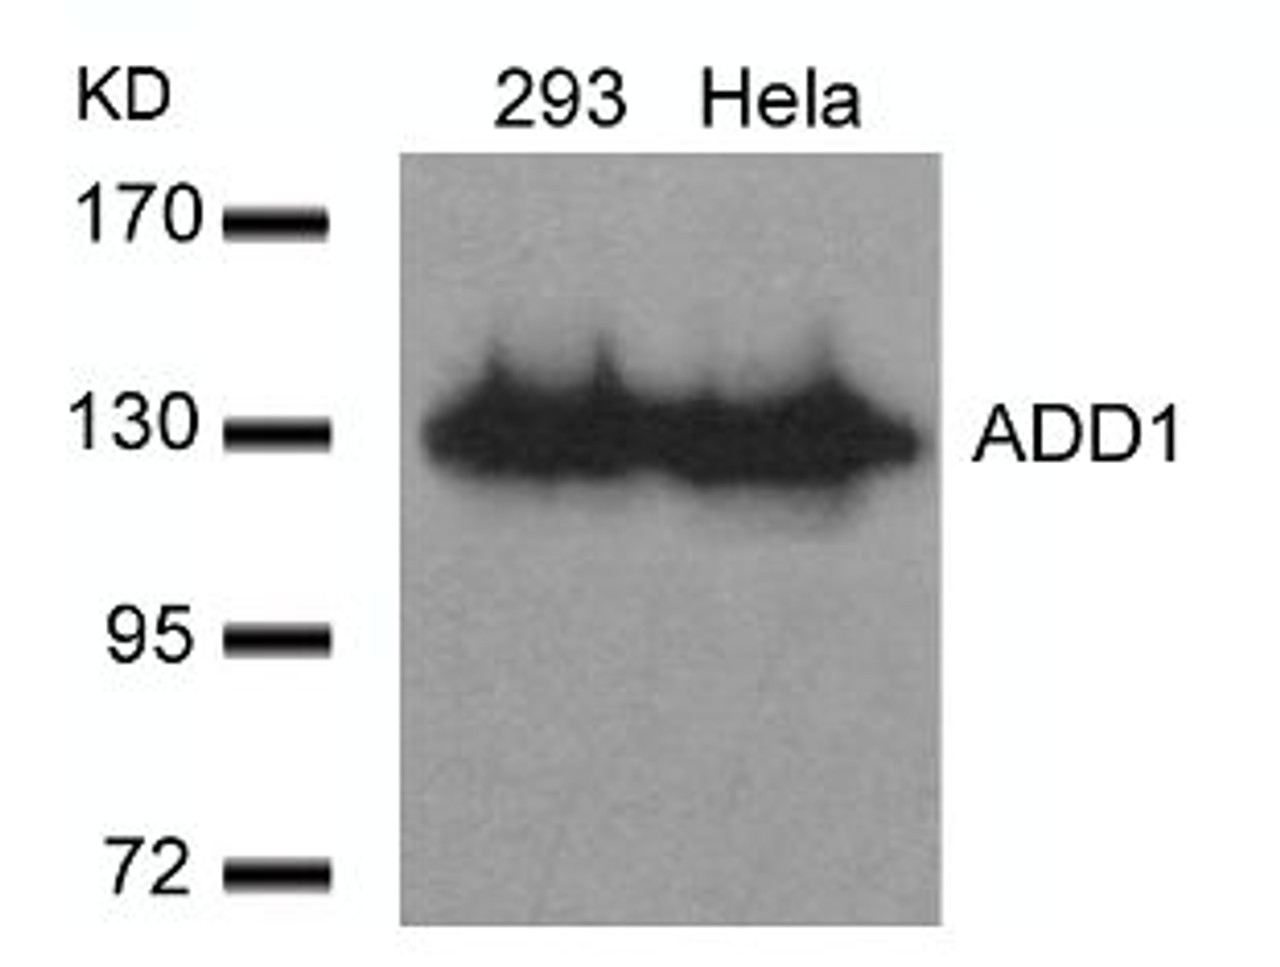 Western blot analysis of lysed extracts from 293 and HeLa cells using ADD1 (Ab-726) .